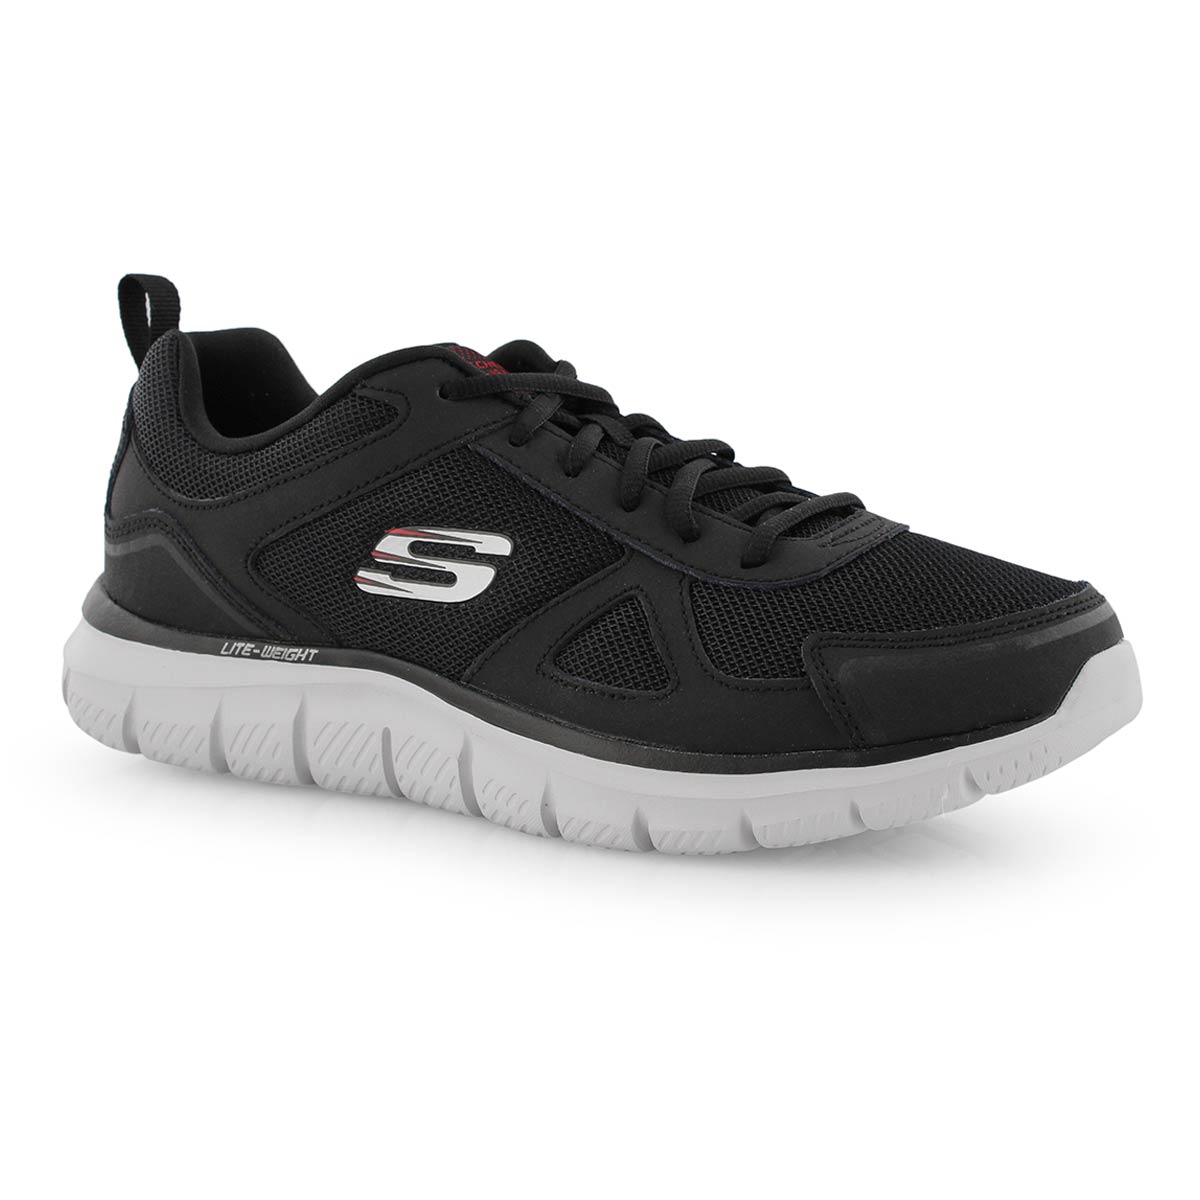 skechers track scloric review